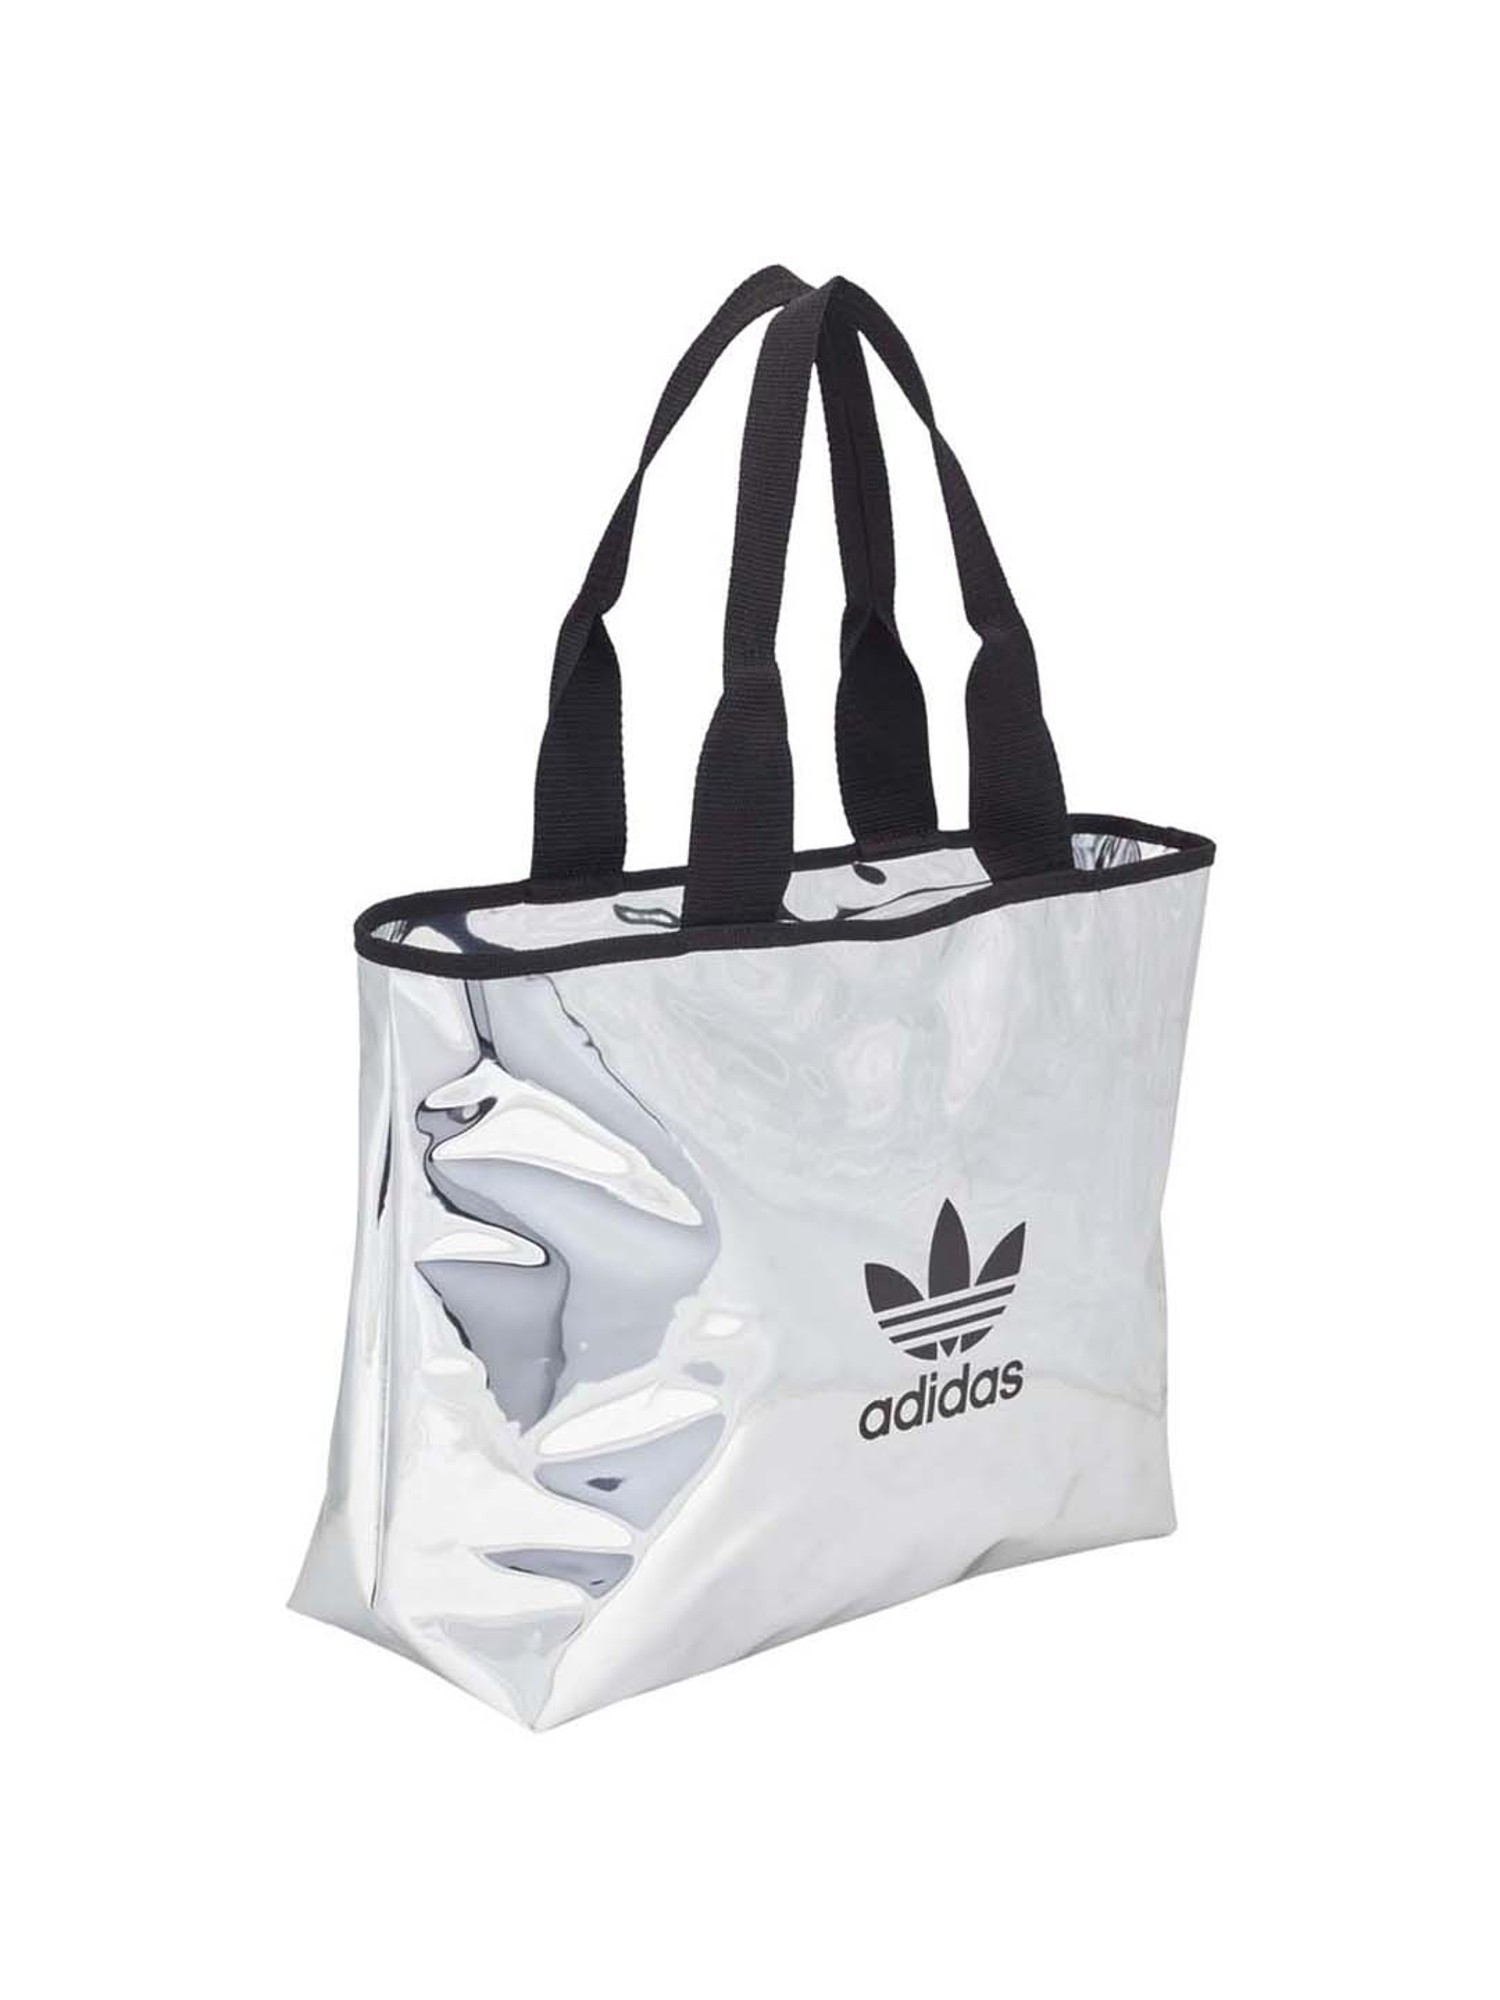 Buy Adidas Silver Large Tote Handbag For Women At Best Price CLiQ